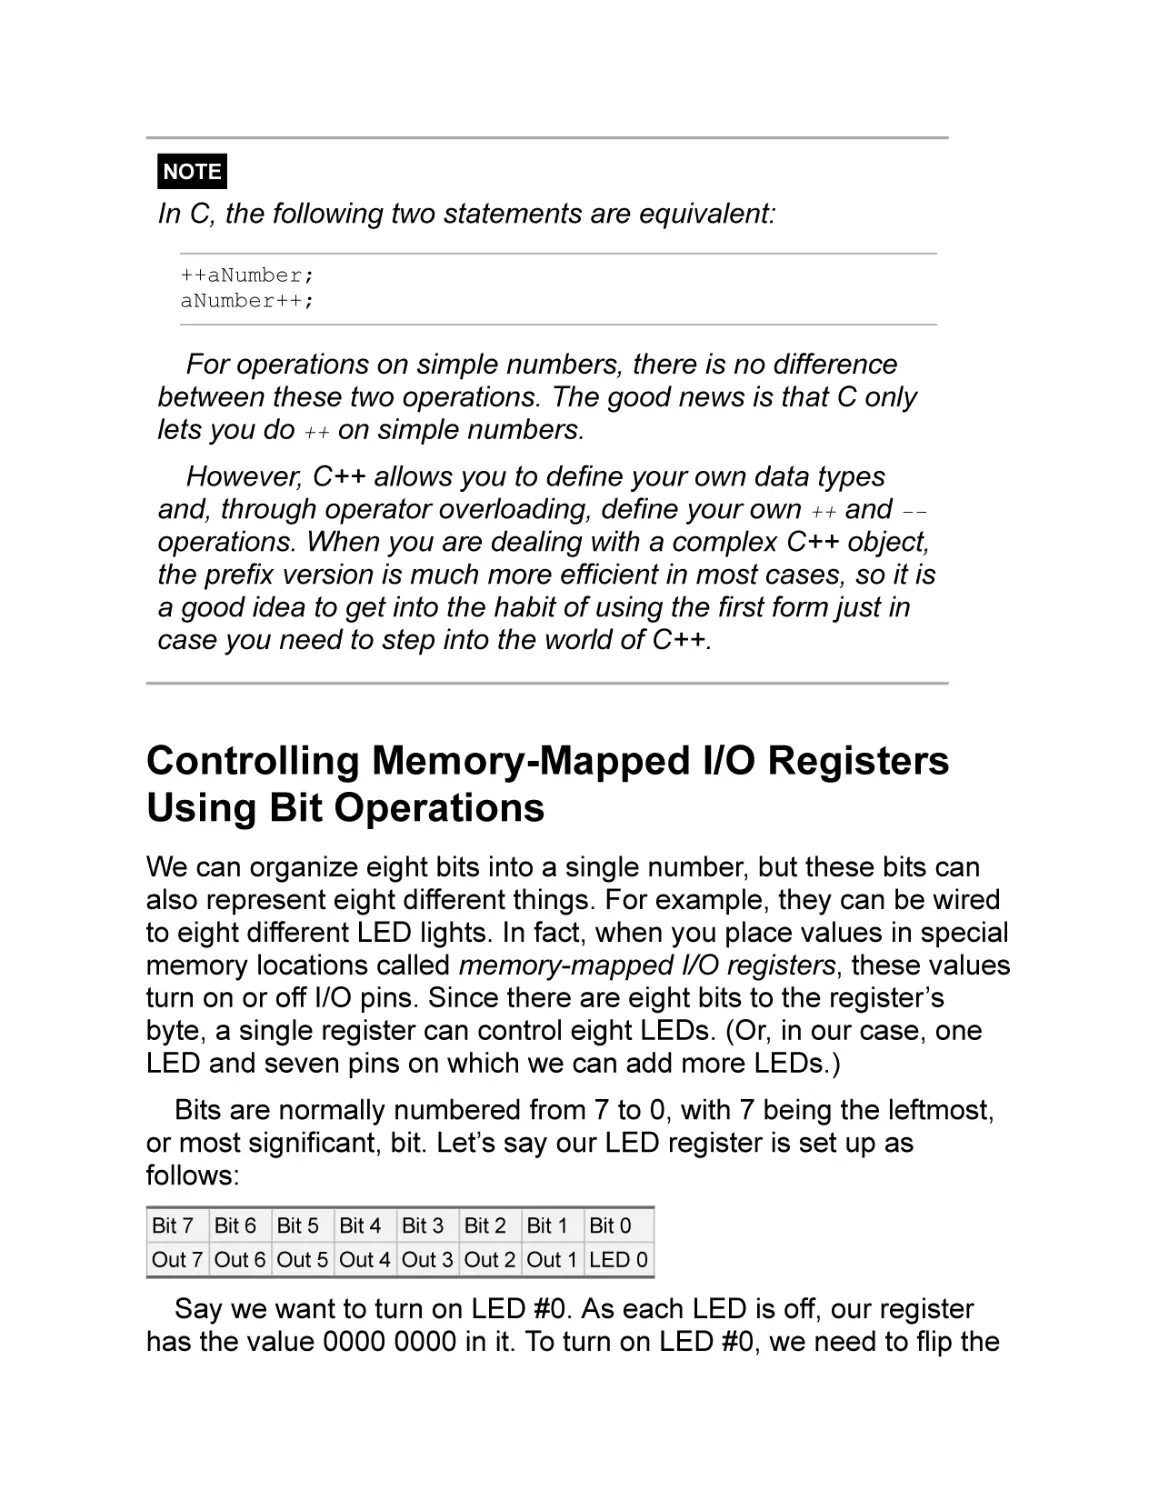 Controlling Memory-Mapped I/O Registers Using Bit Operations